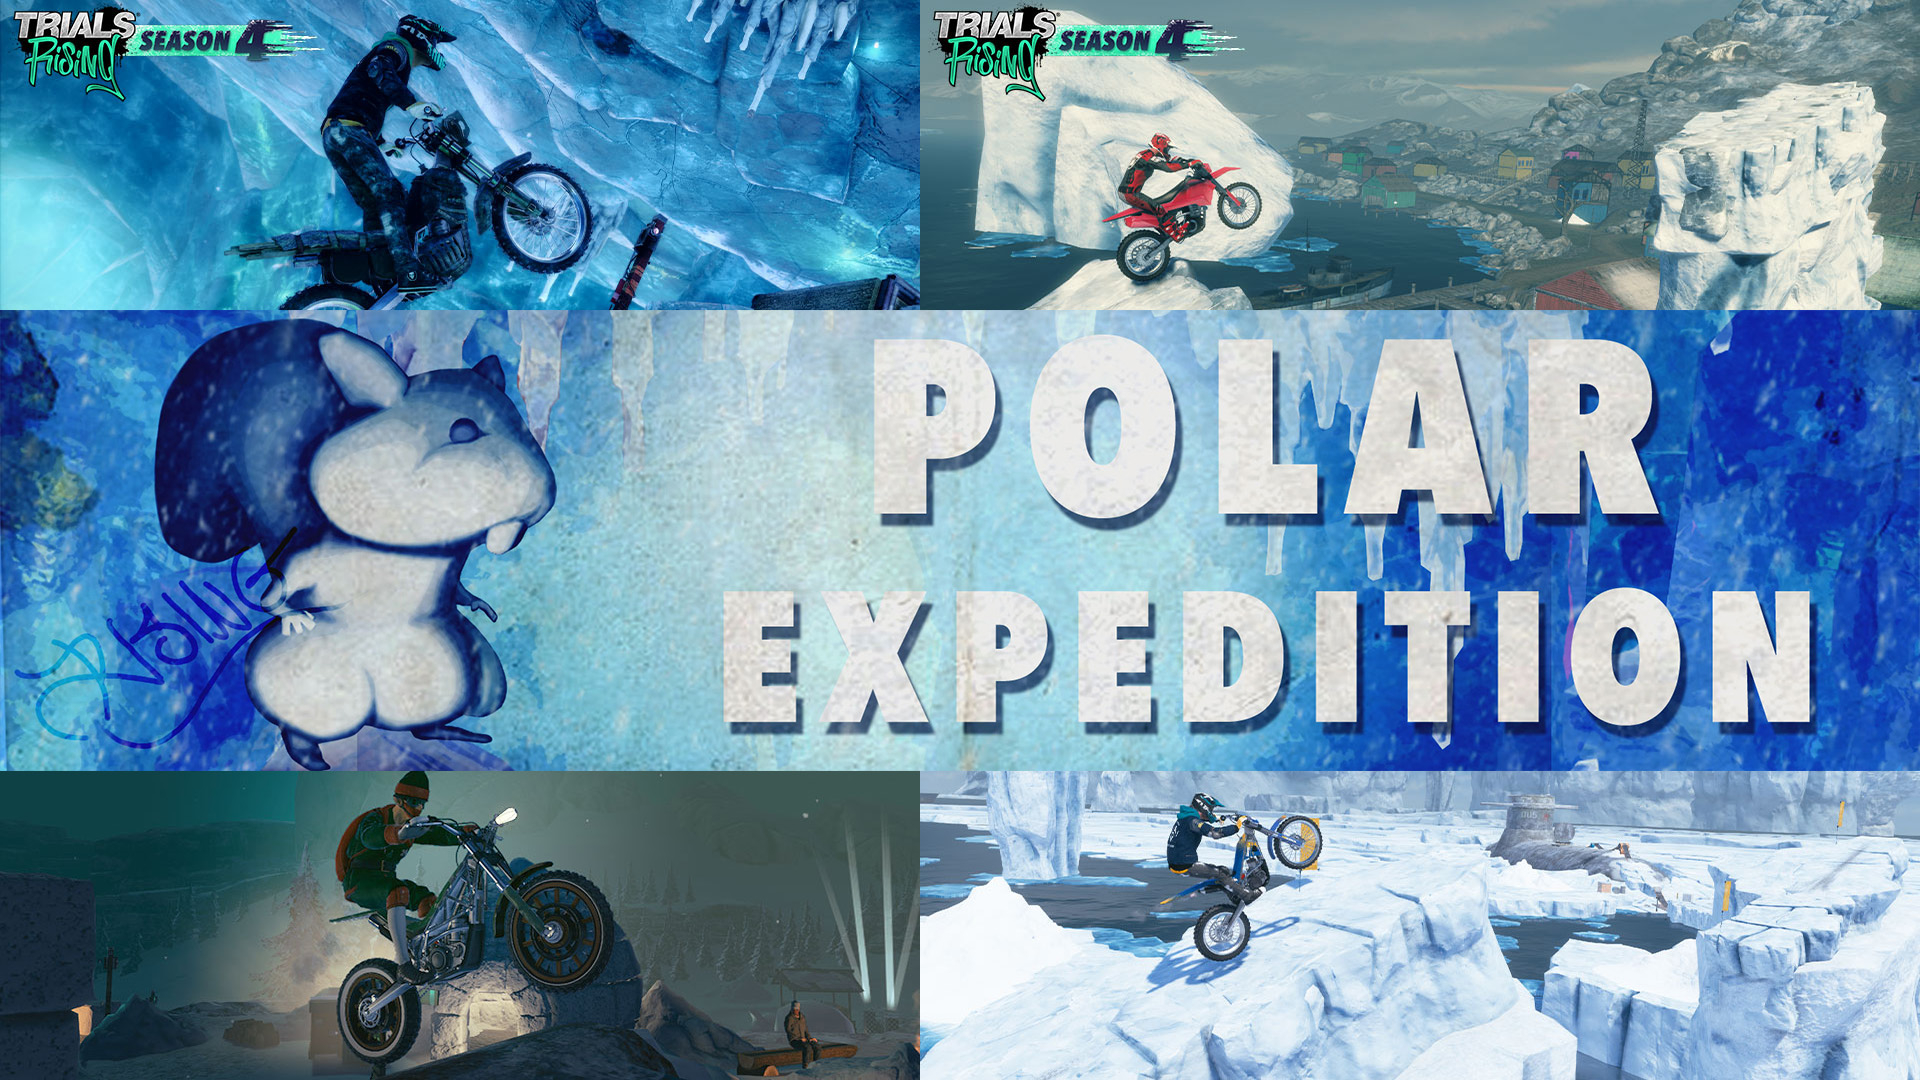 Trials Rising Now Has A Winter Track Pack Released Titled Polar Expedition, Ride Around On Snowy Obstacles That Test Your Skills At Not Slipping Off Ice